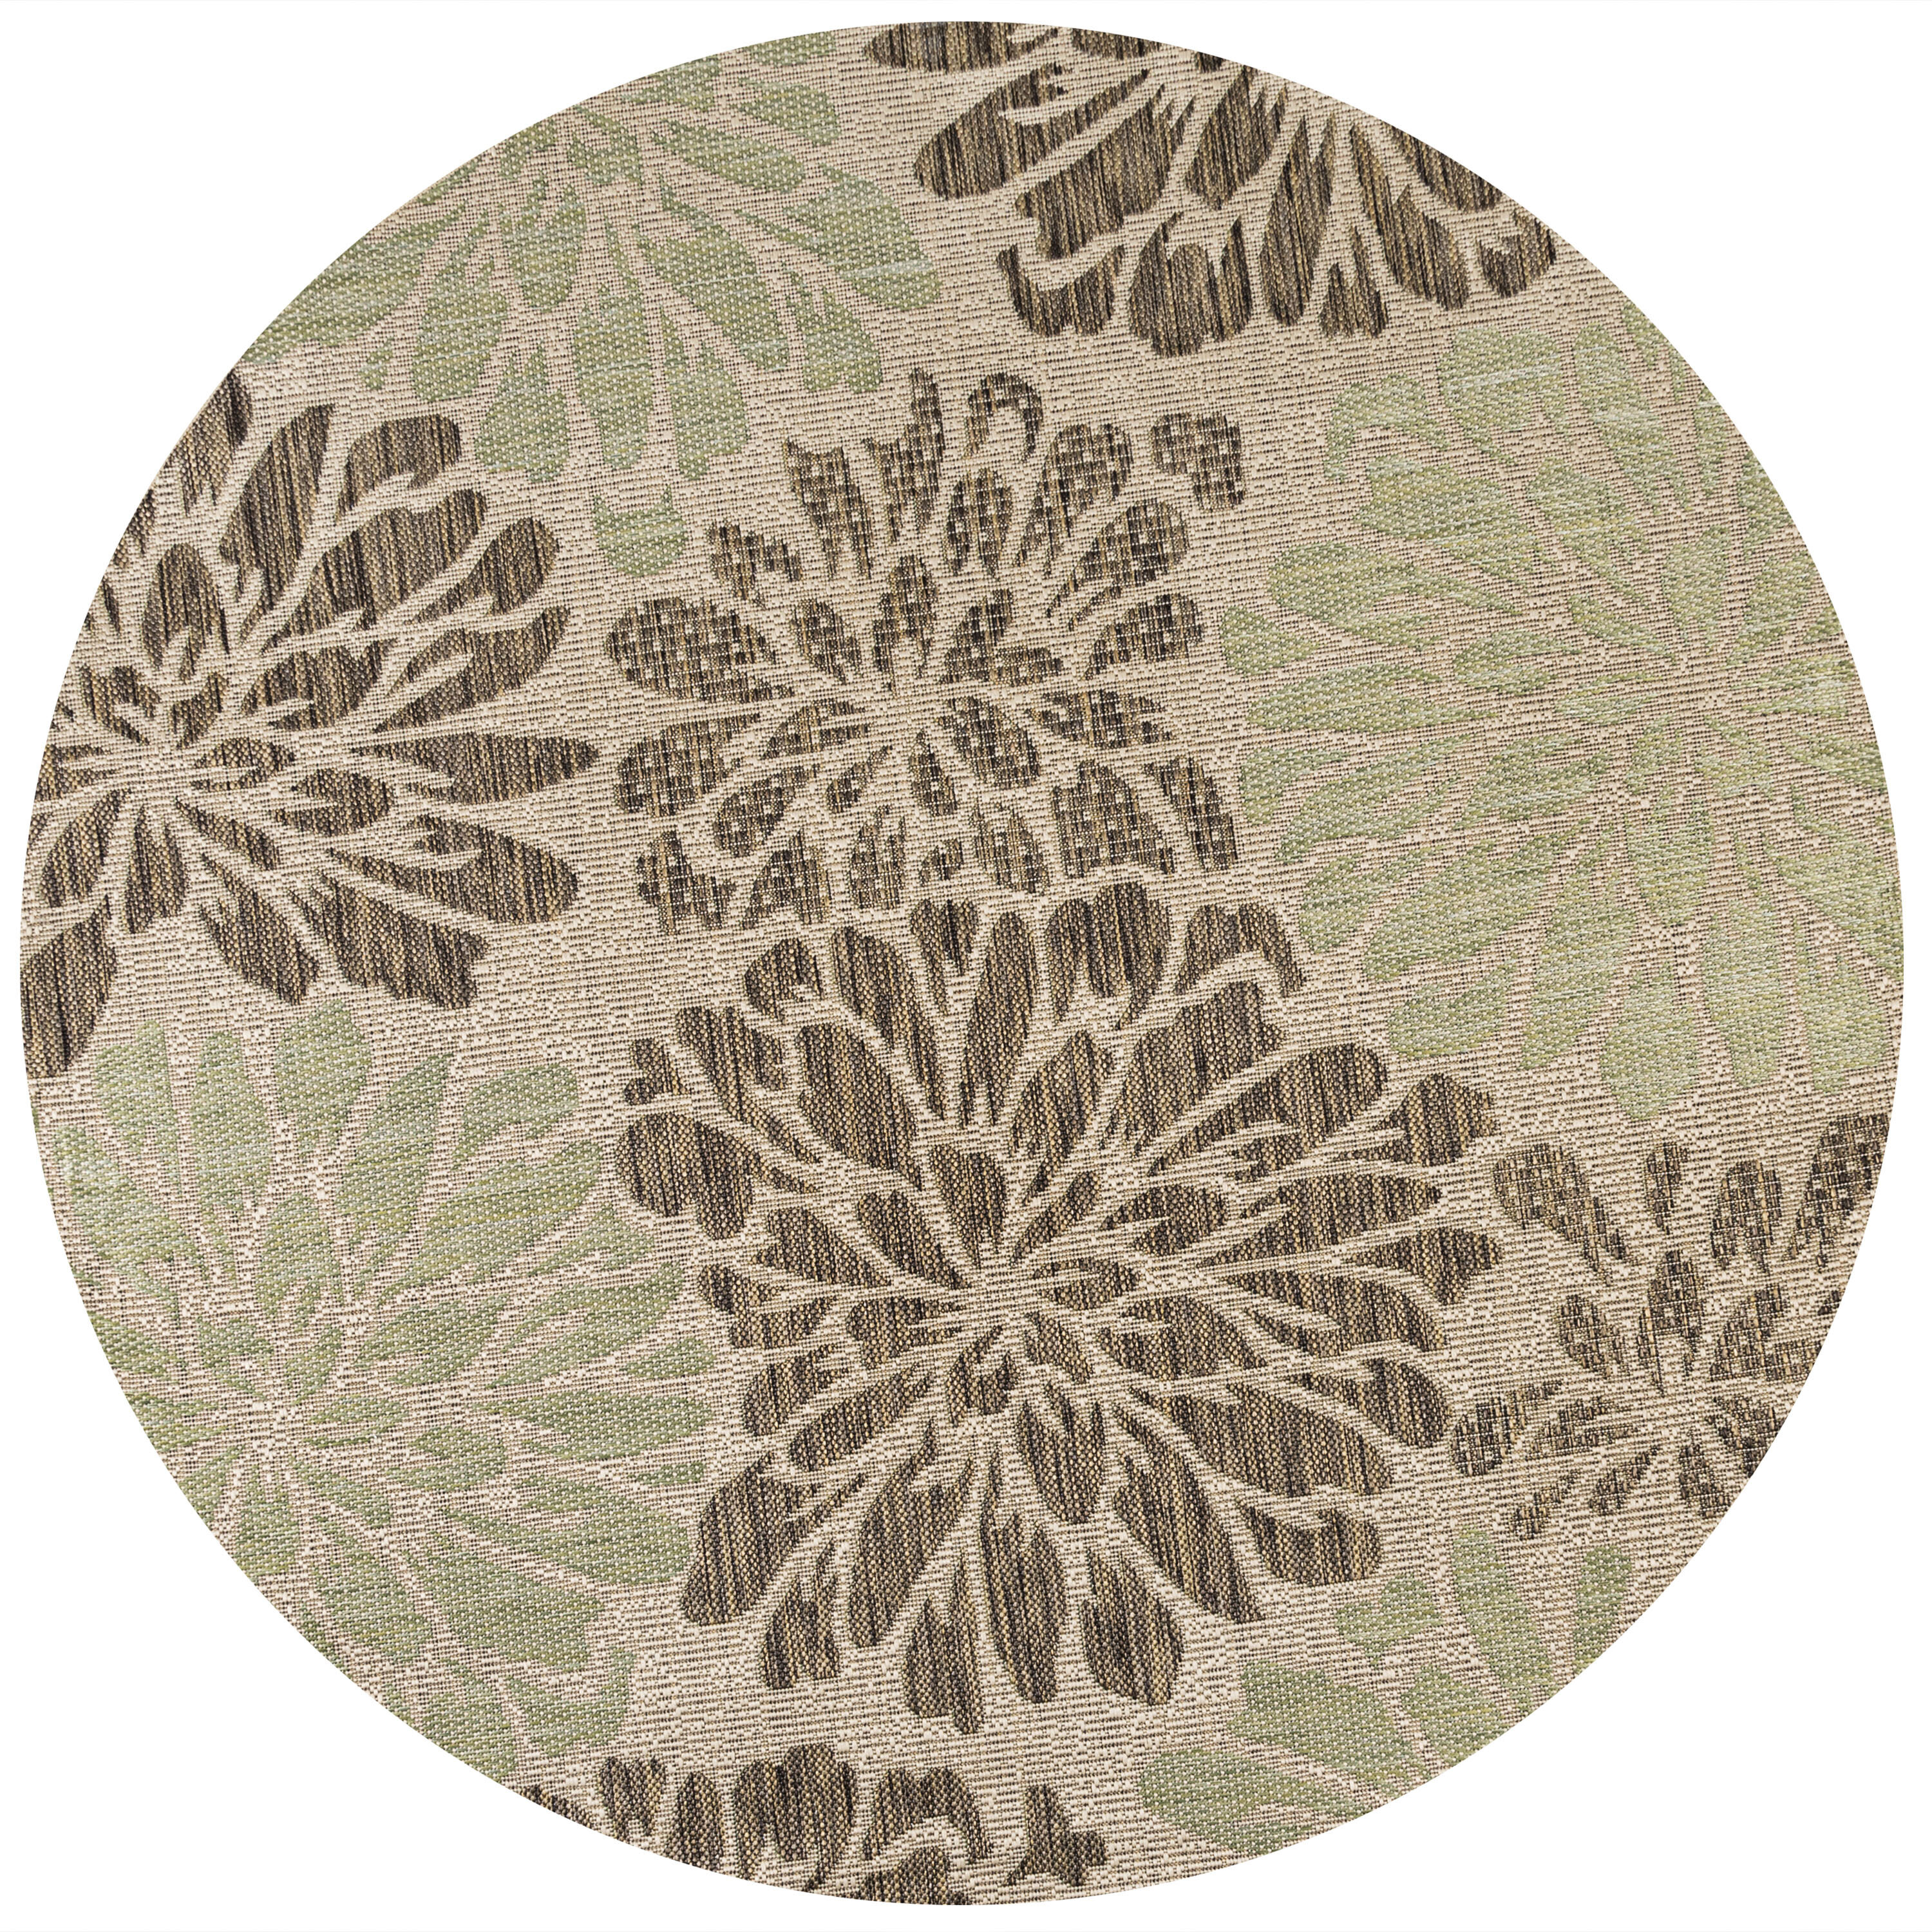 JONATHAN Y Zinnia Modern Floral Navy/Green 3 ft. 11 in. x 6 ft